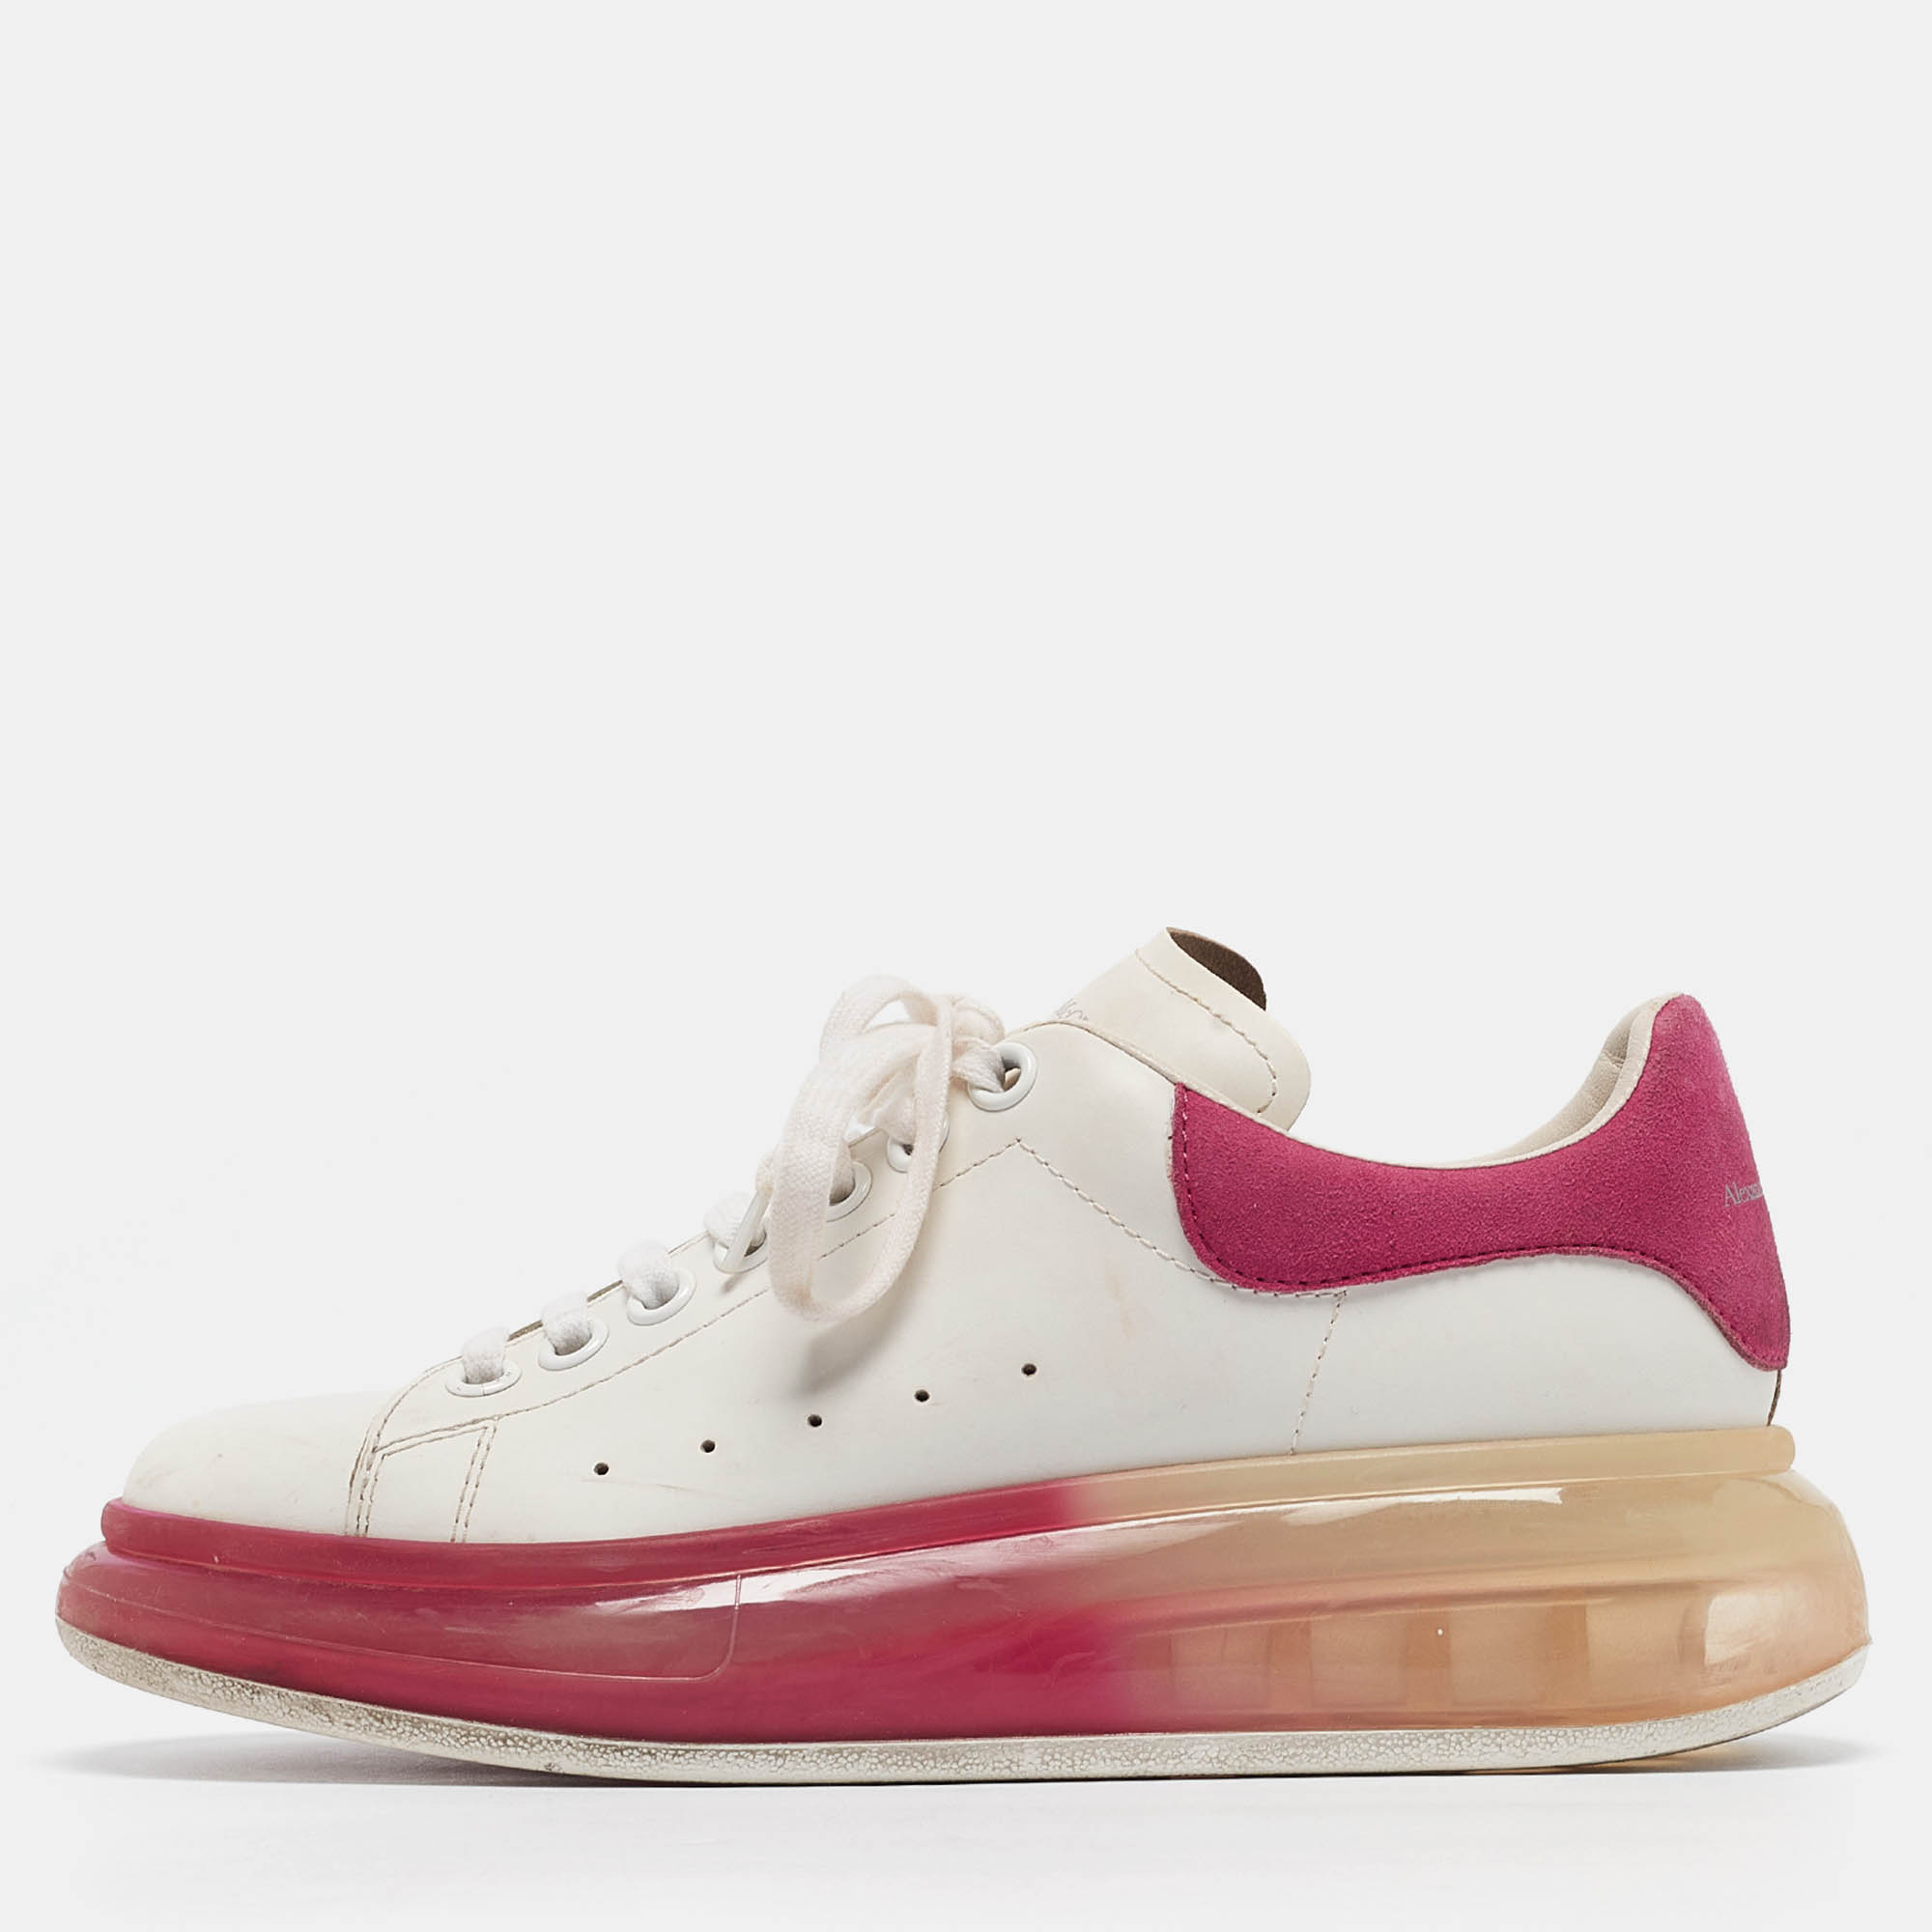 

Alexander McQueen White/Pink Leather Oversized Clear Sole Sneakers Size